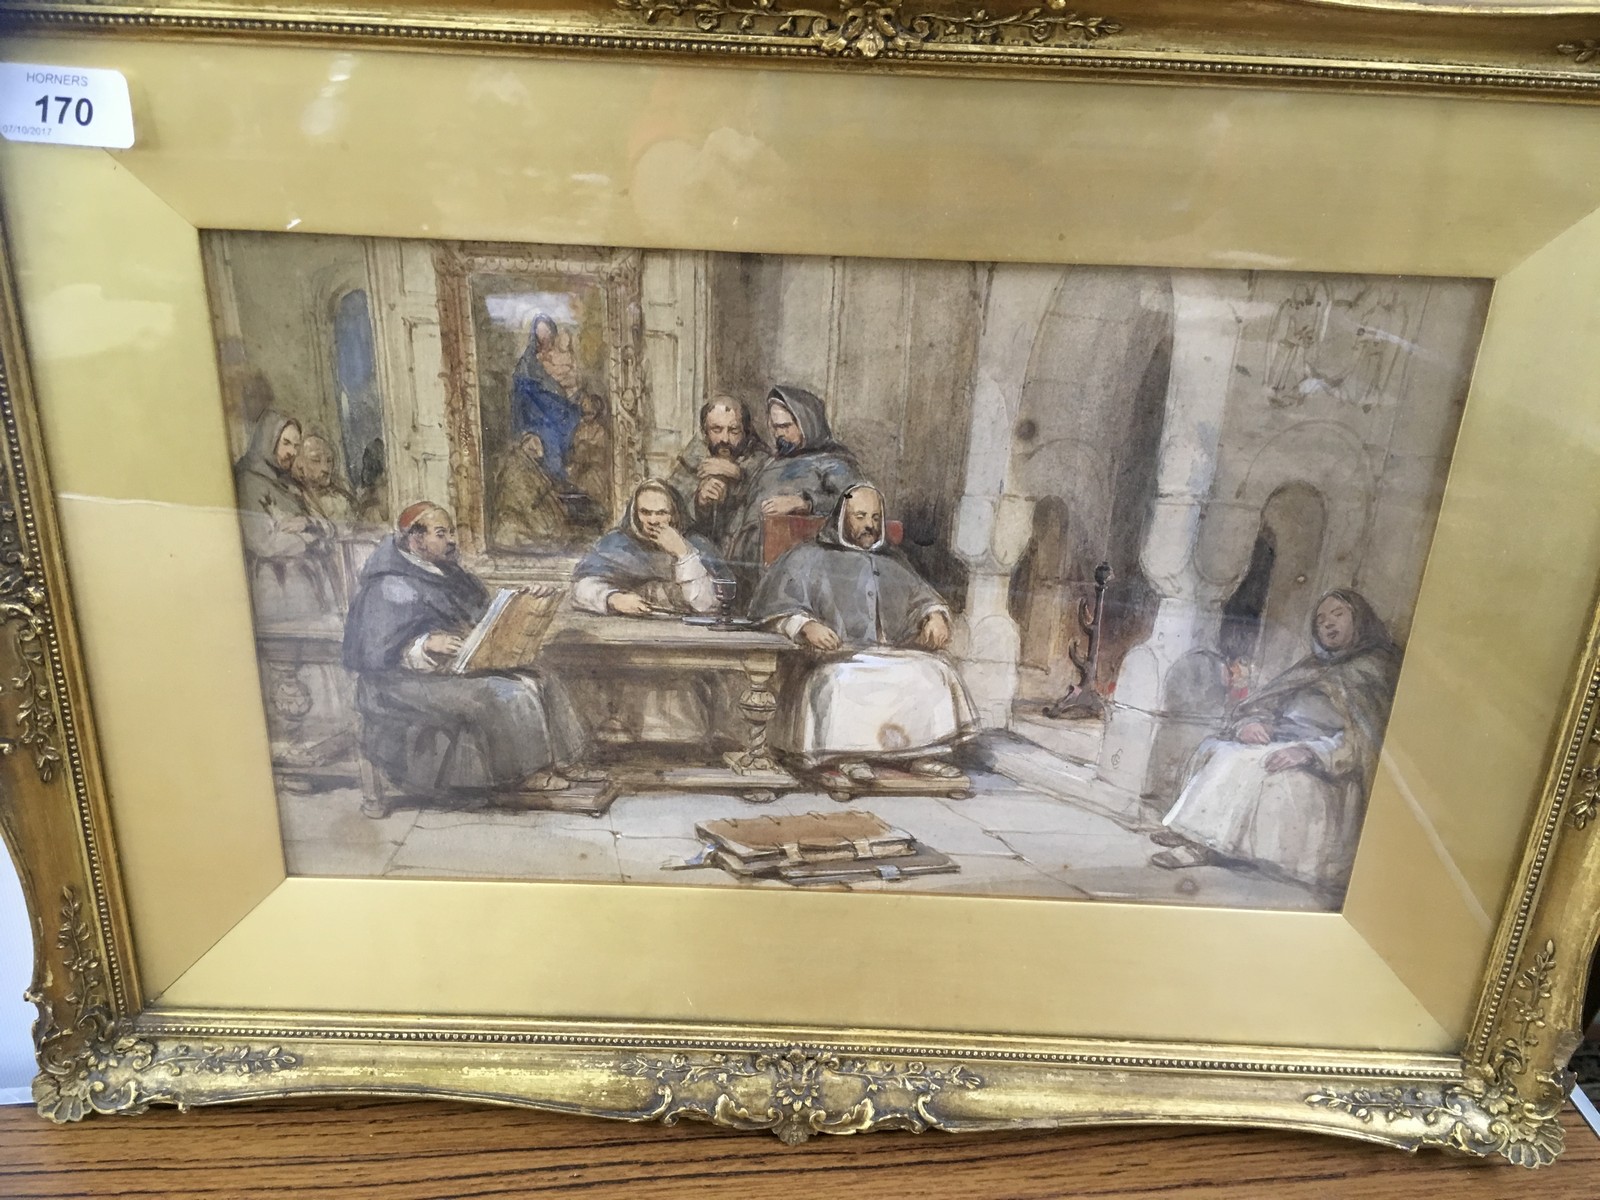 ATTRIBUTED TO GEORGE CATTERMOLE: A MONASTIC SCENE, WATERCOLOUR BEARING MONOGRAM G.C.